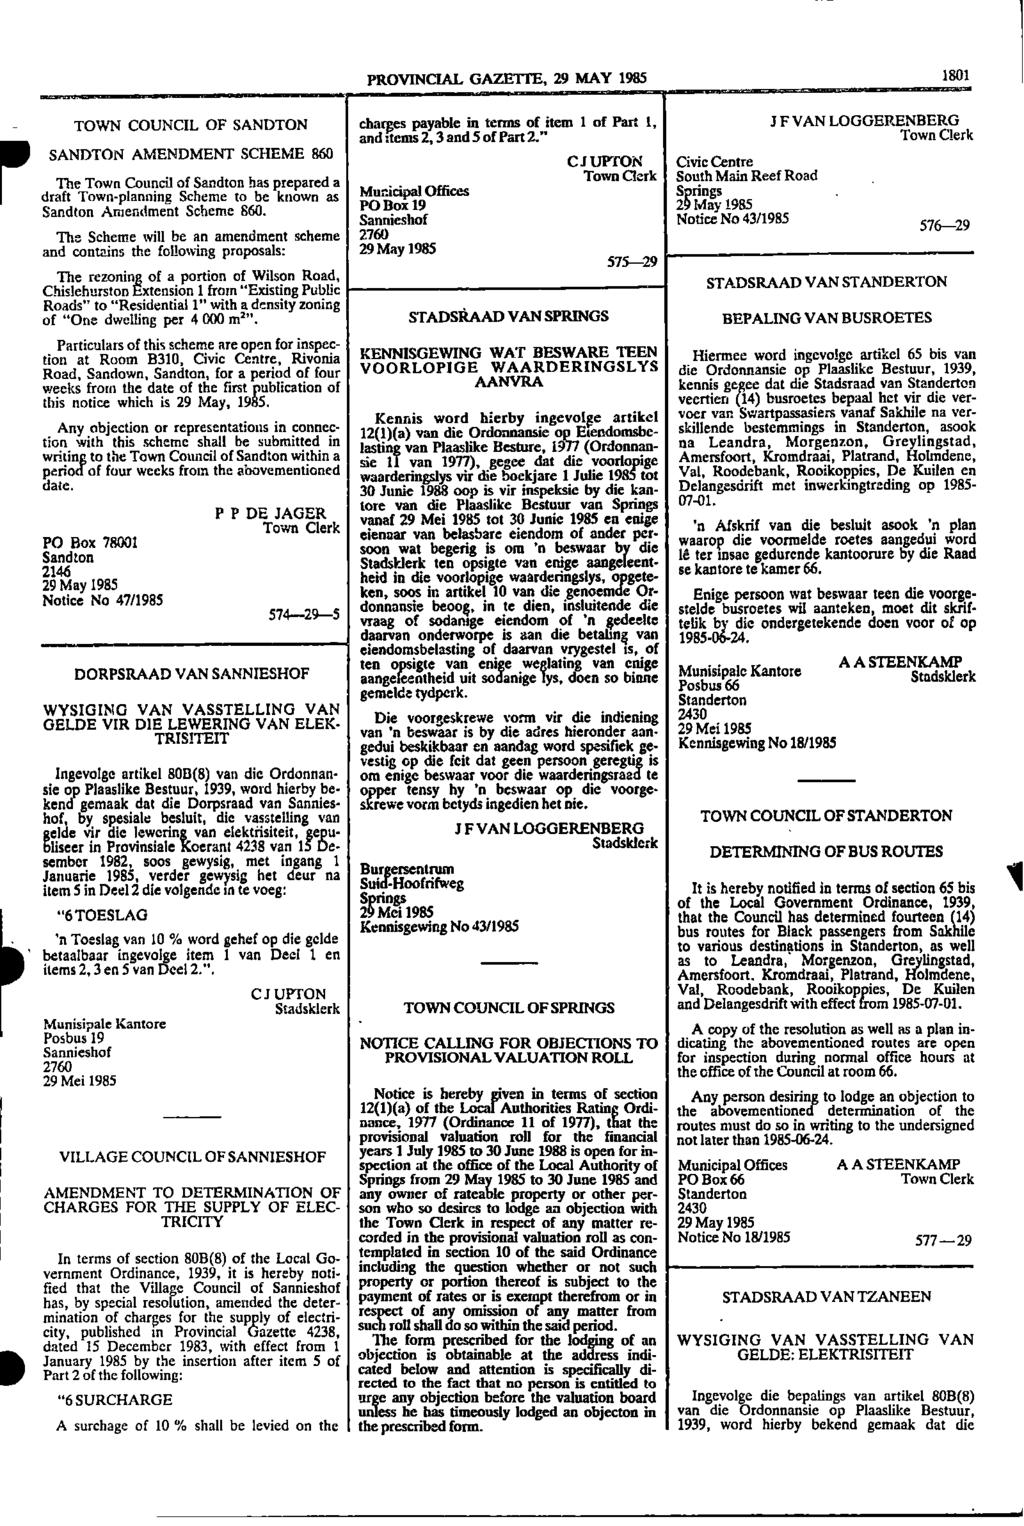 PROVNCAL GAZETTE, 29 MAY 1985 1801 TOWN COUNCL OF SANDTON charges payable in terms of item 1 of Part 1, J F VAN LOGGERENBERG and items 2, 3 and 5 of Part 2" Town Clerk SANDTON AMENDMENT SCHEME 860 C